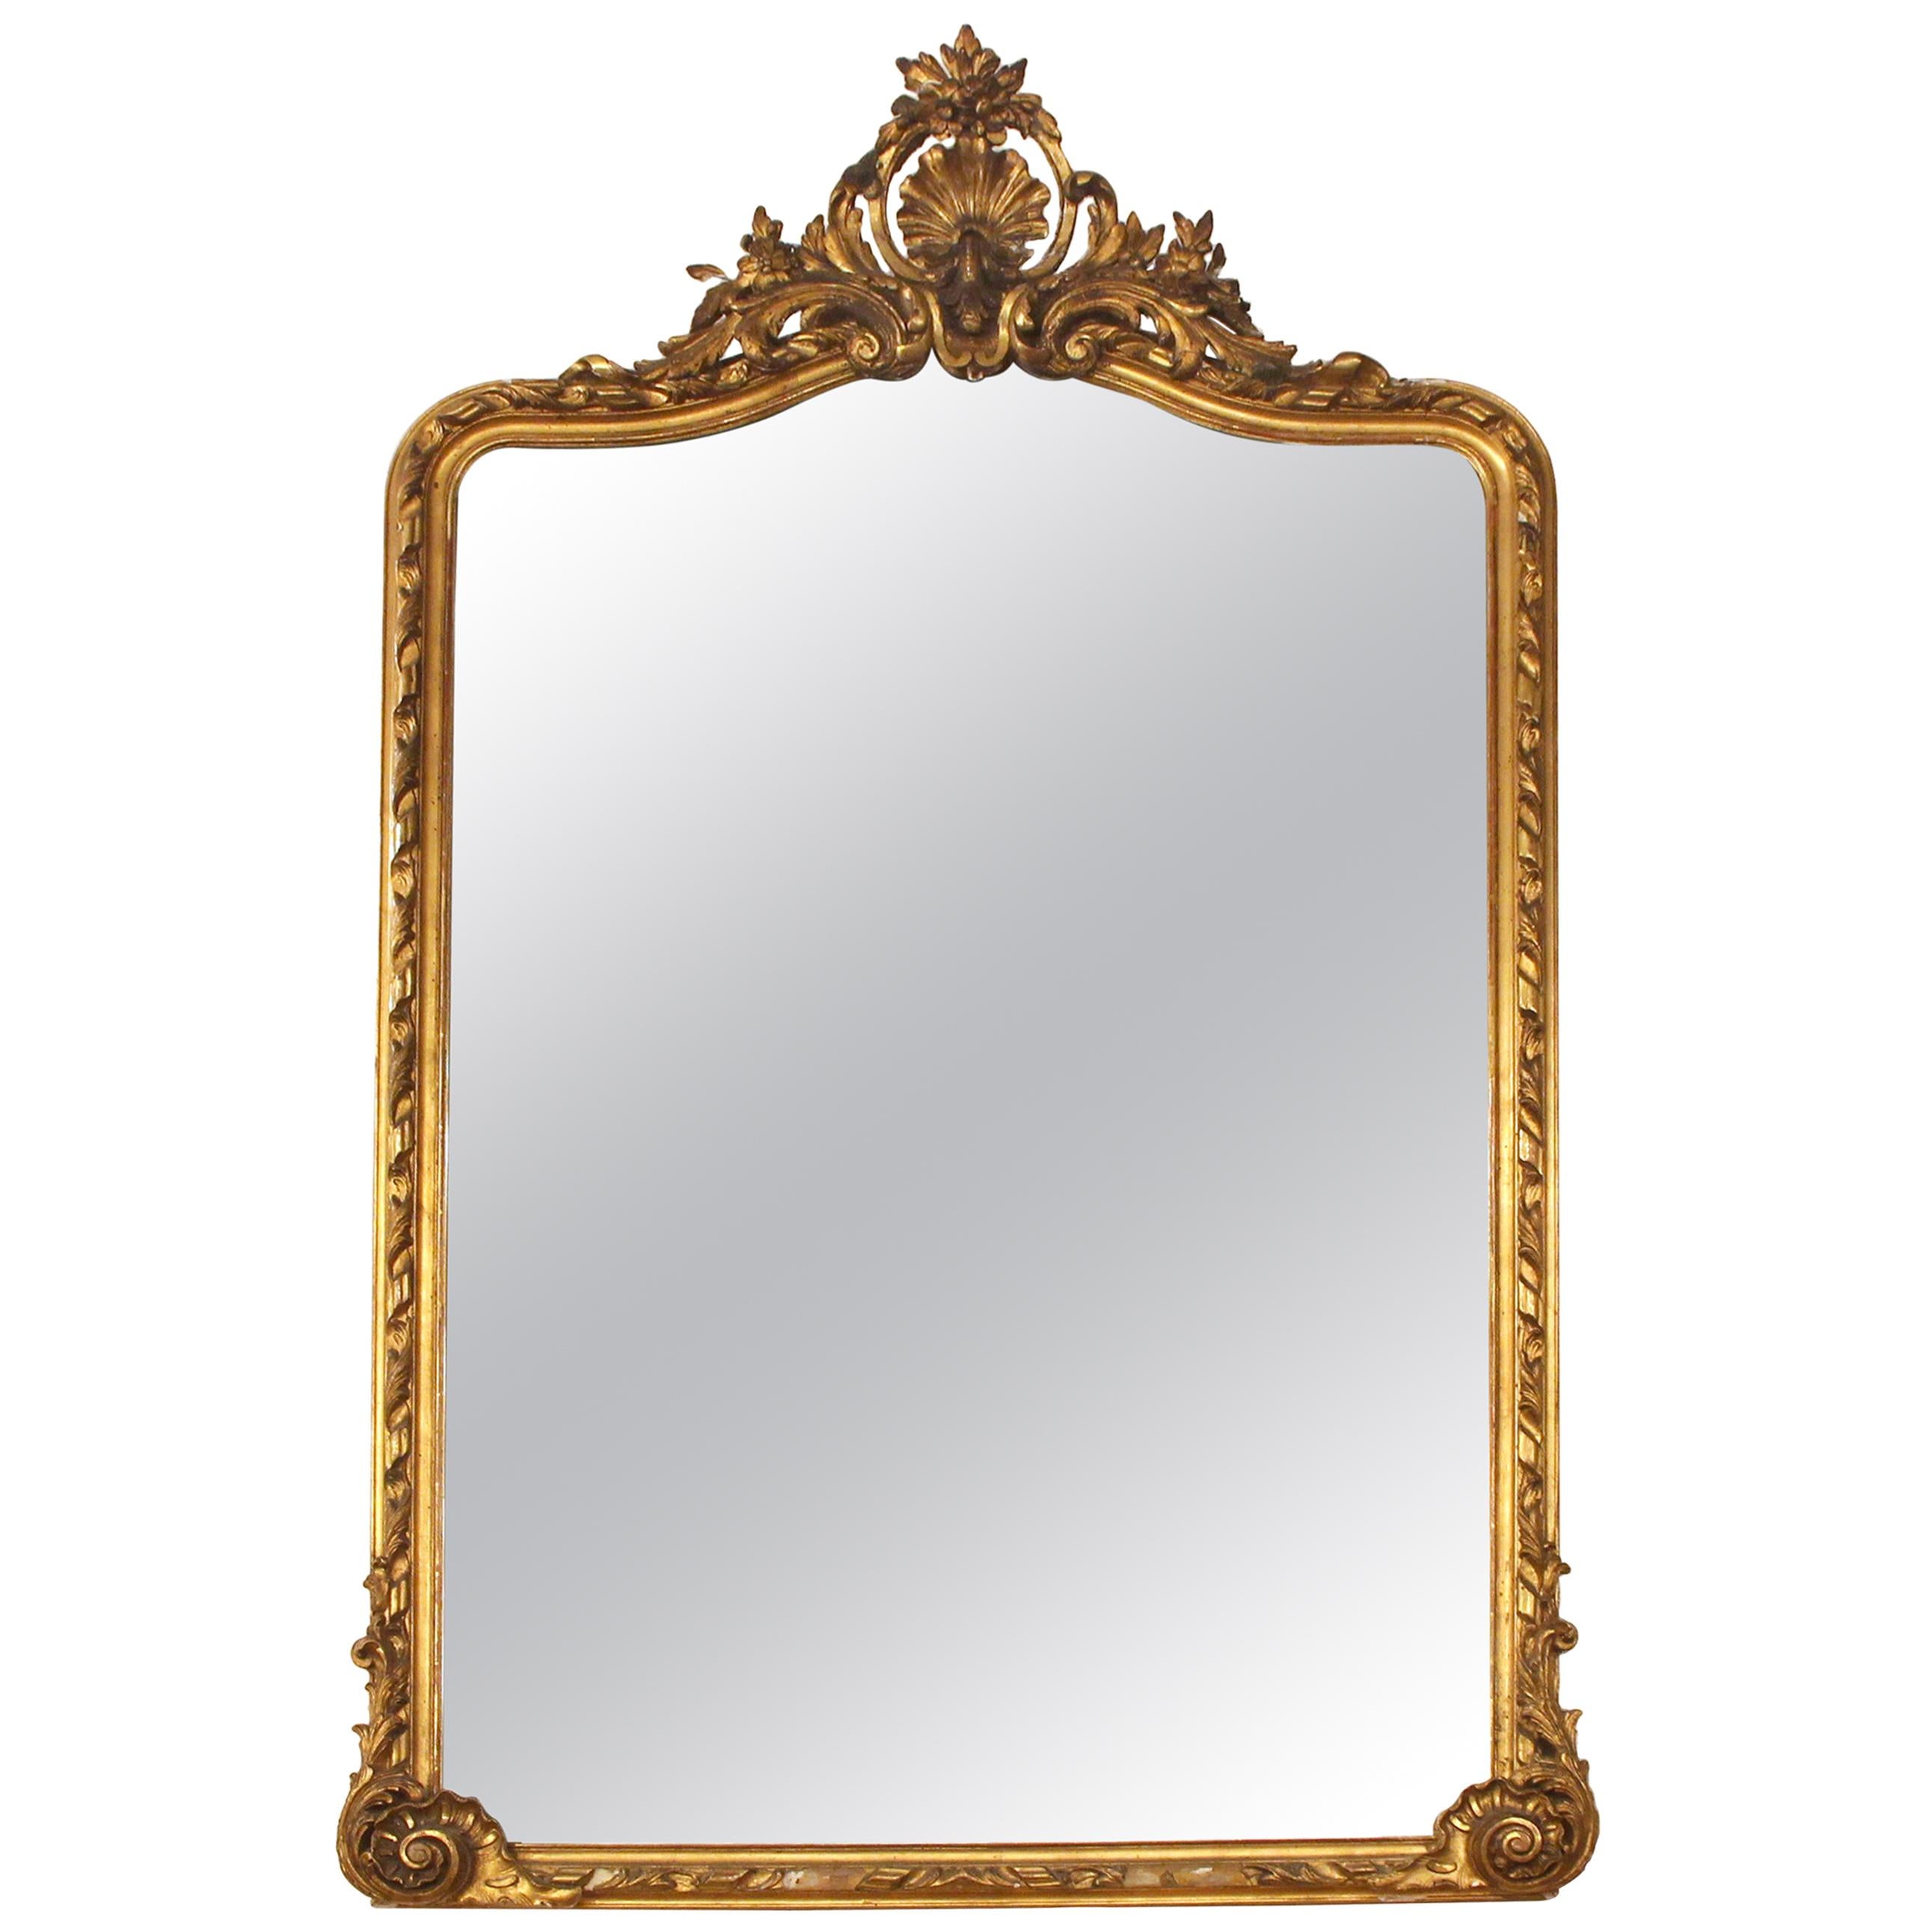 19th Century French Ornate Gold Gilt Mirror with Center Cartouche